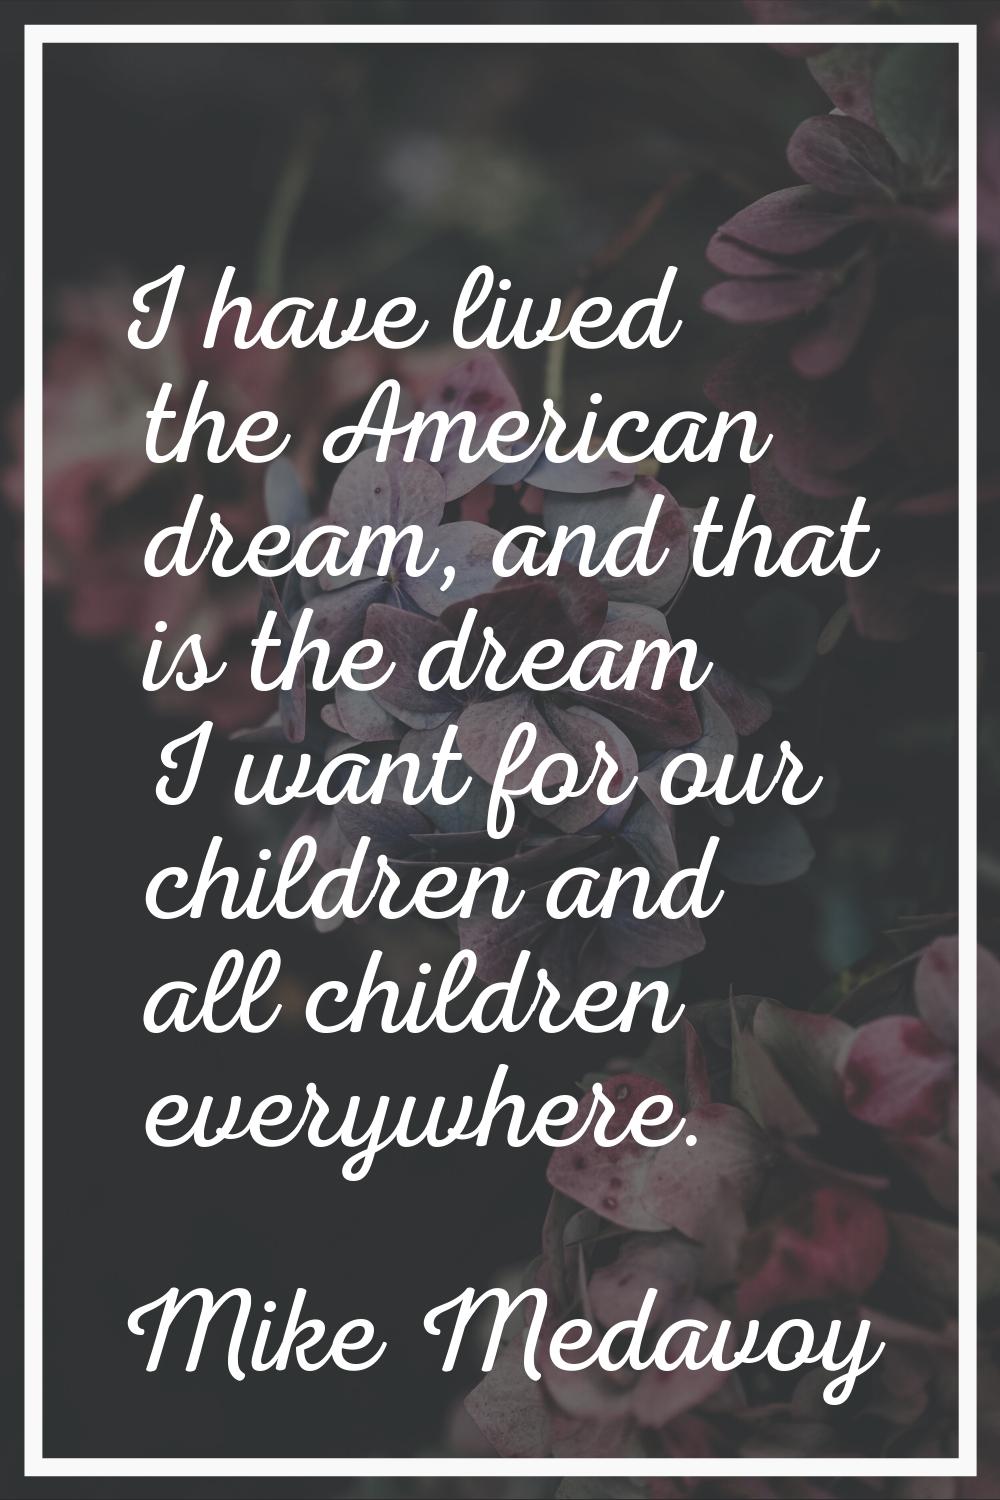 I have lived the American dream, and that is the dream I want for our children and all children eve